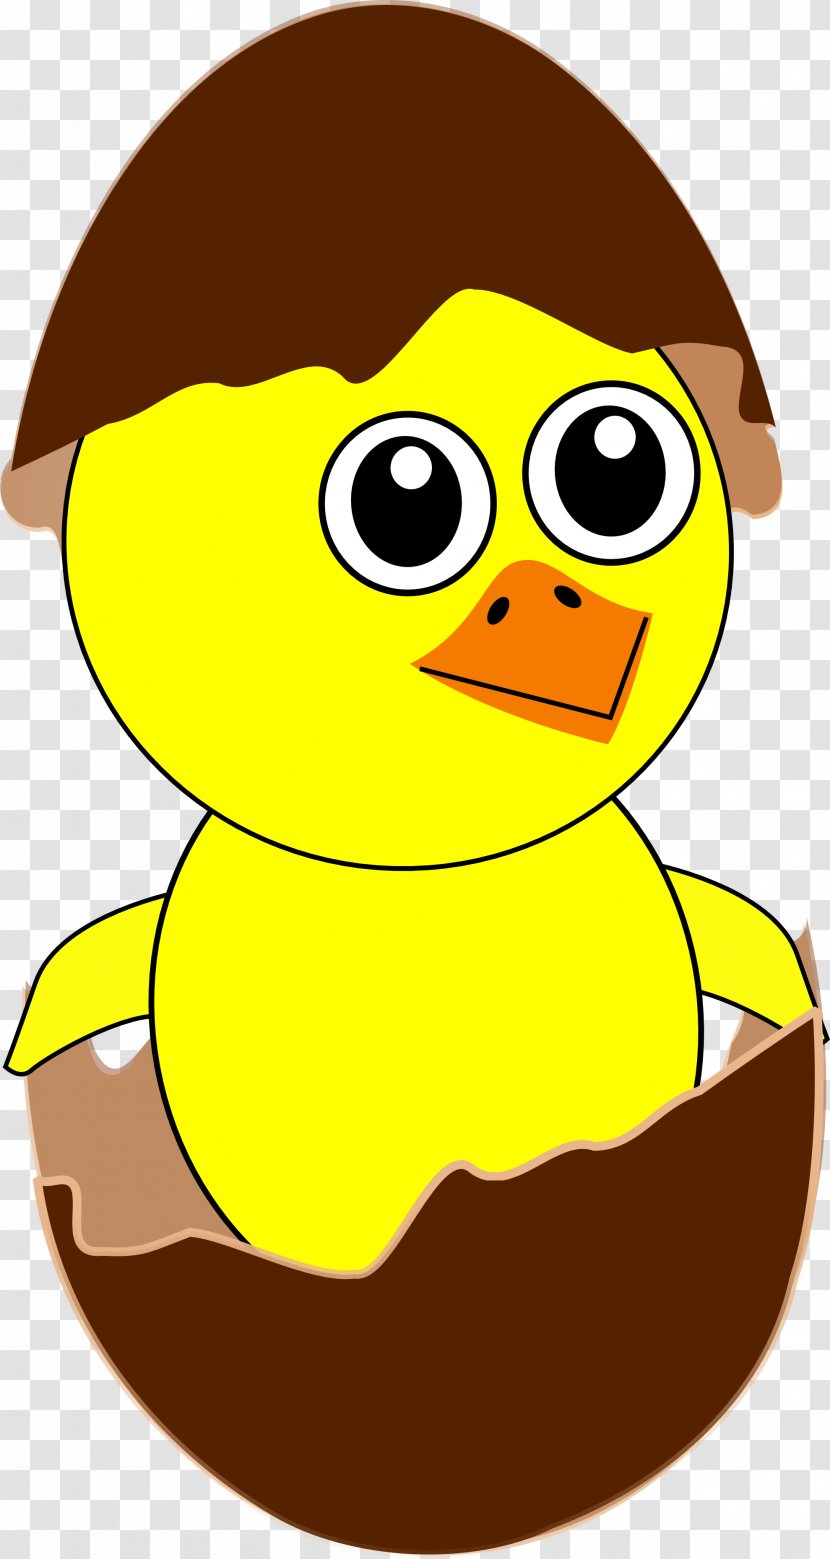 Chicken Cartoon Clip Art - Emoticon - Easter Images Transparent PNG